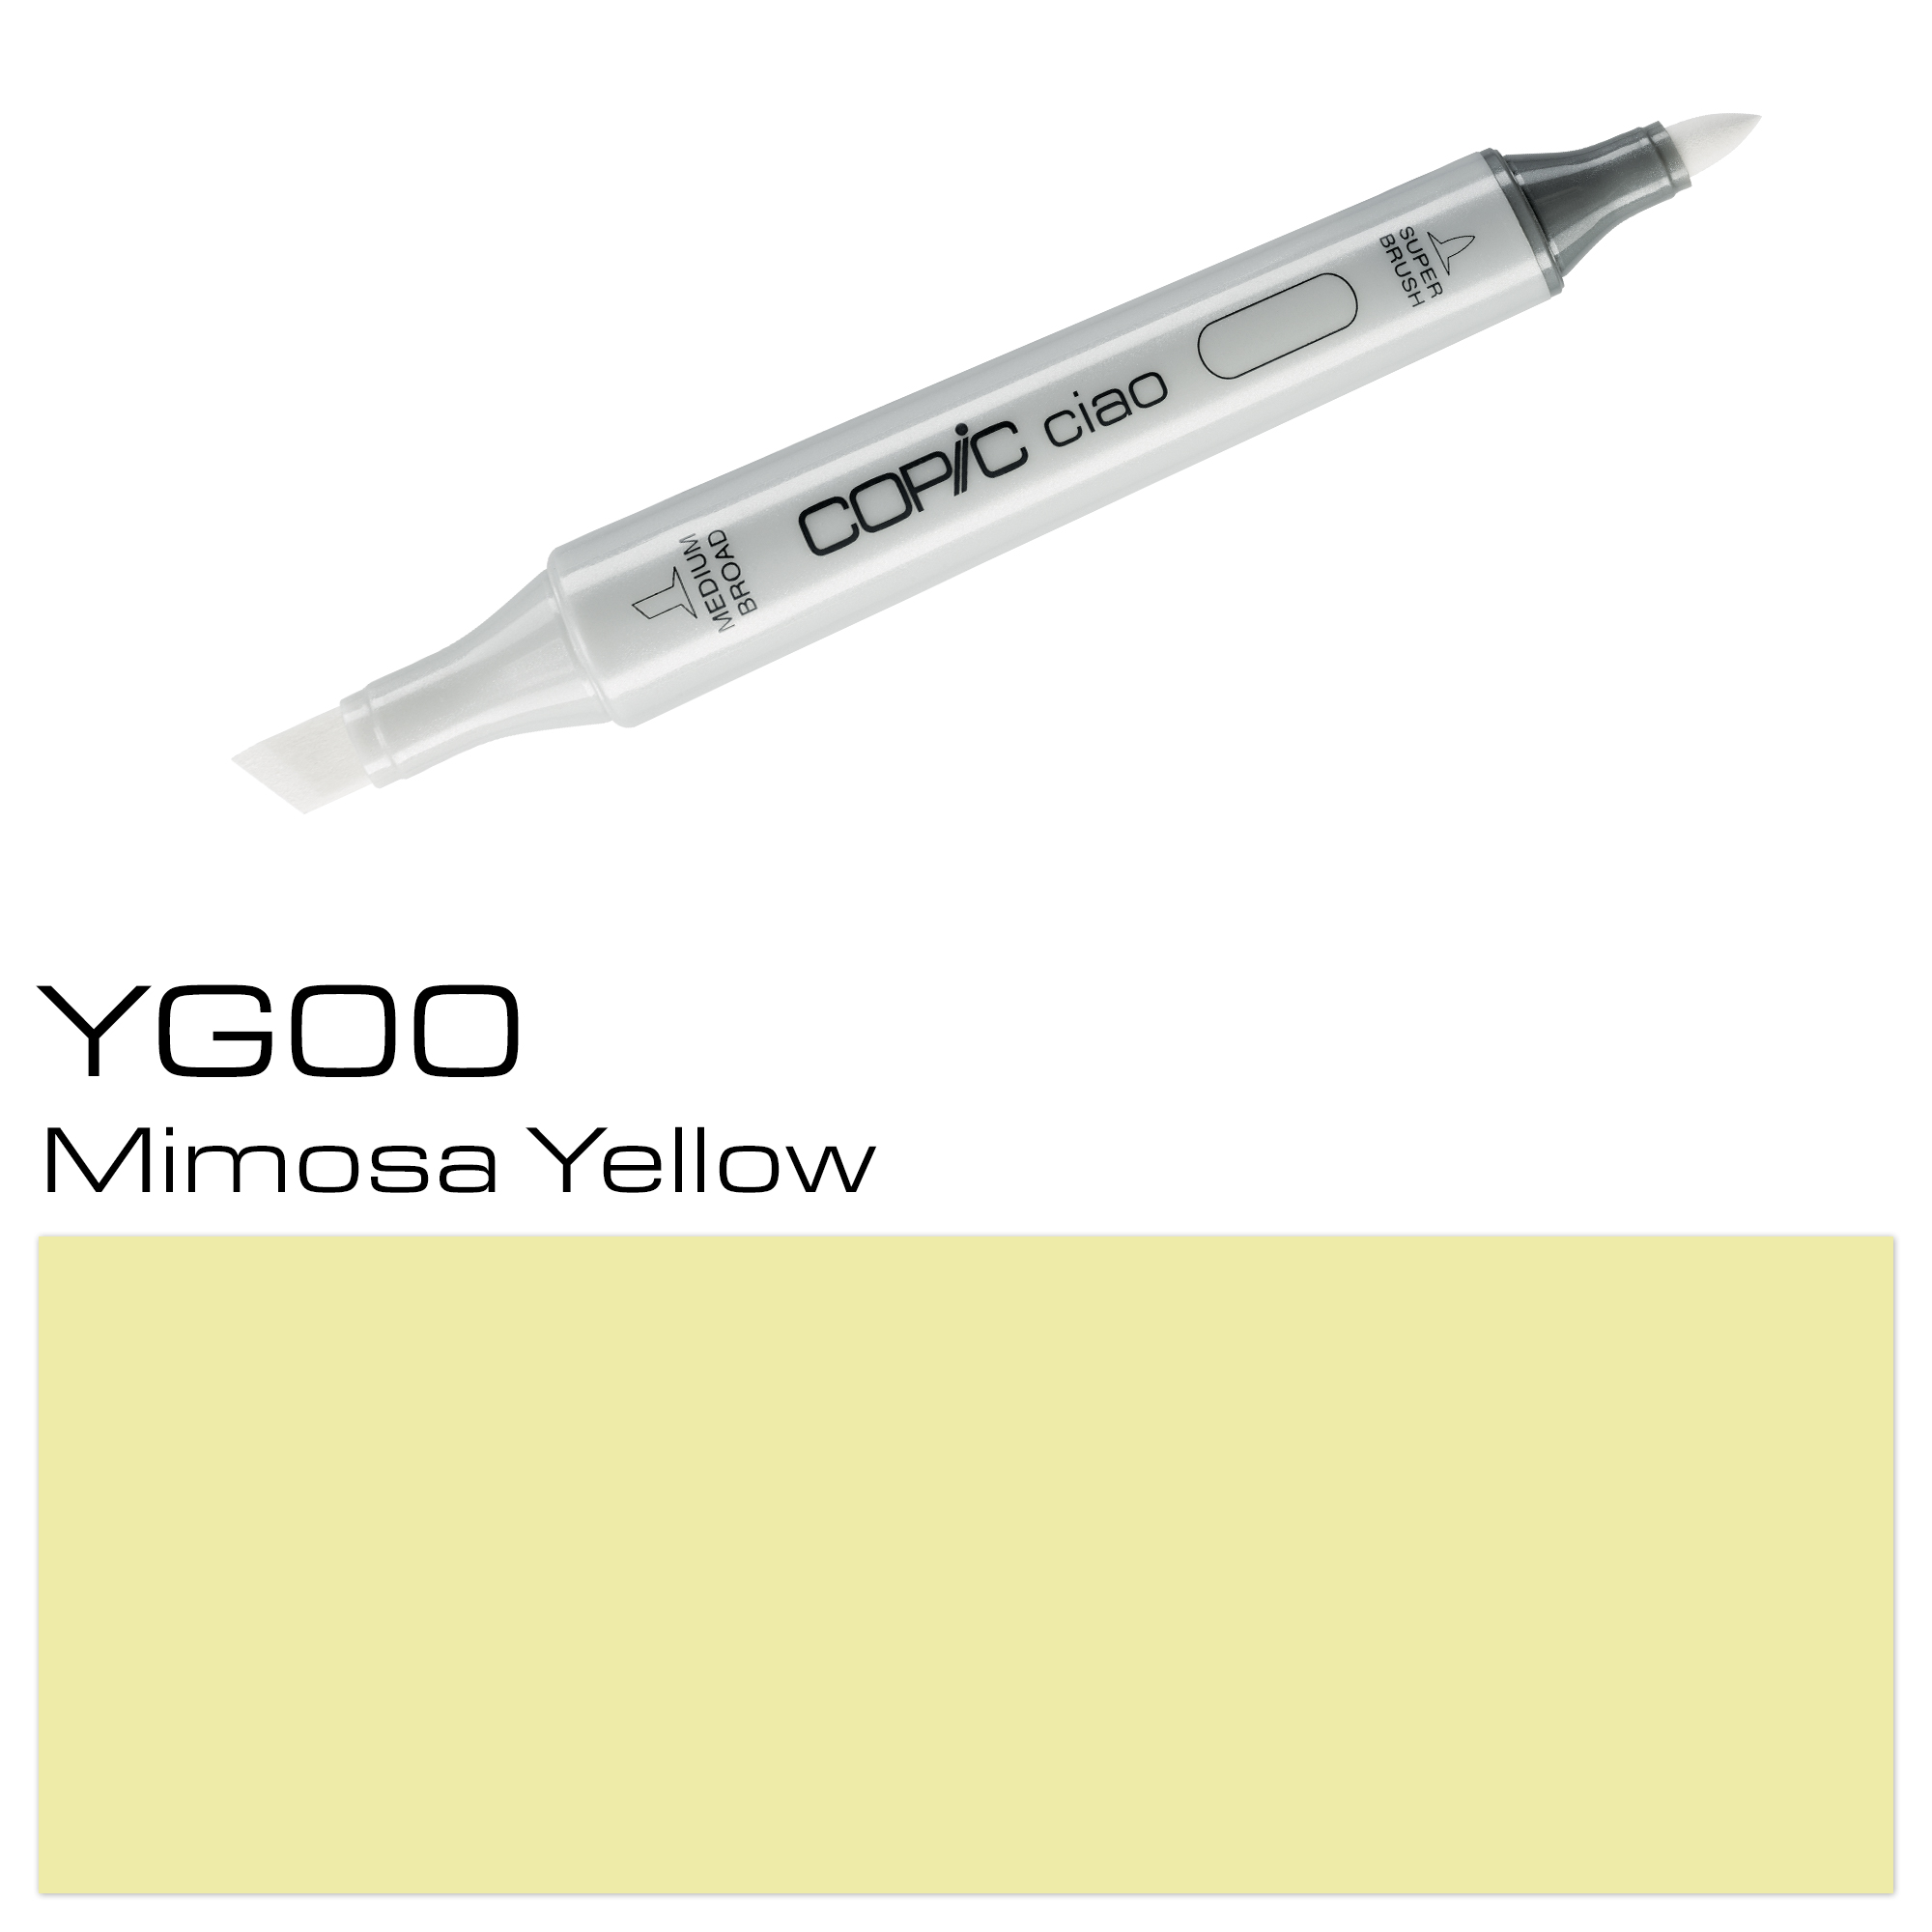 COPIC CIAO MIMOSA YELLOW YG00